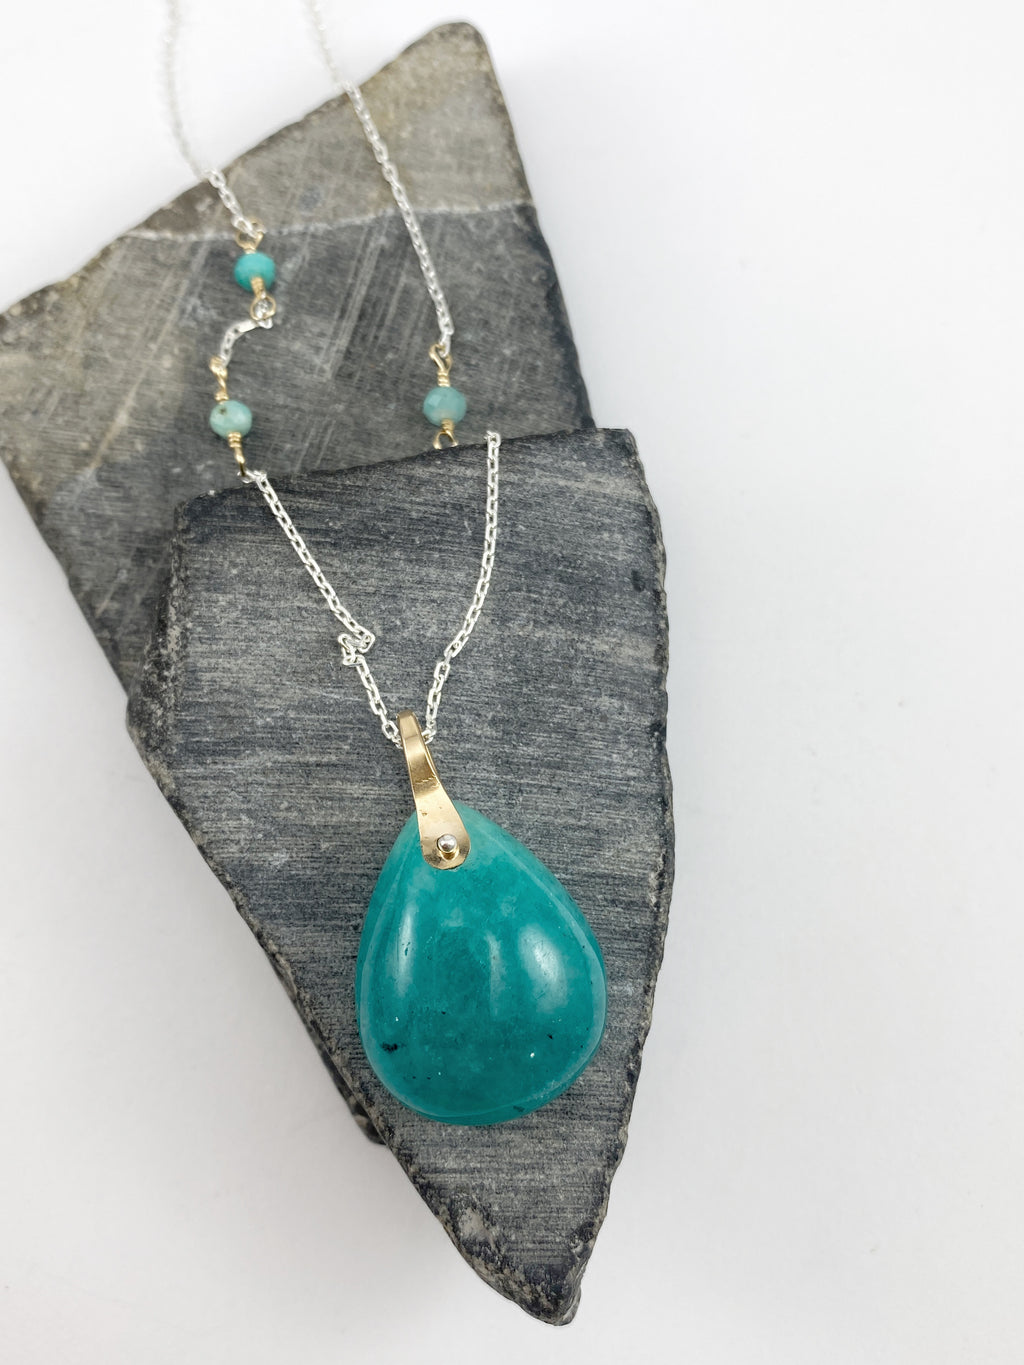 Sterling Silver and Amazonite Necklace